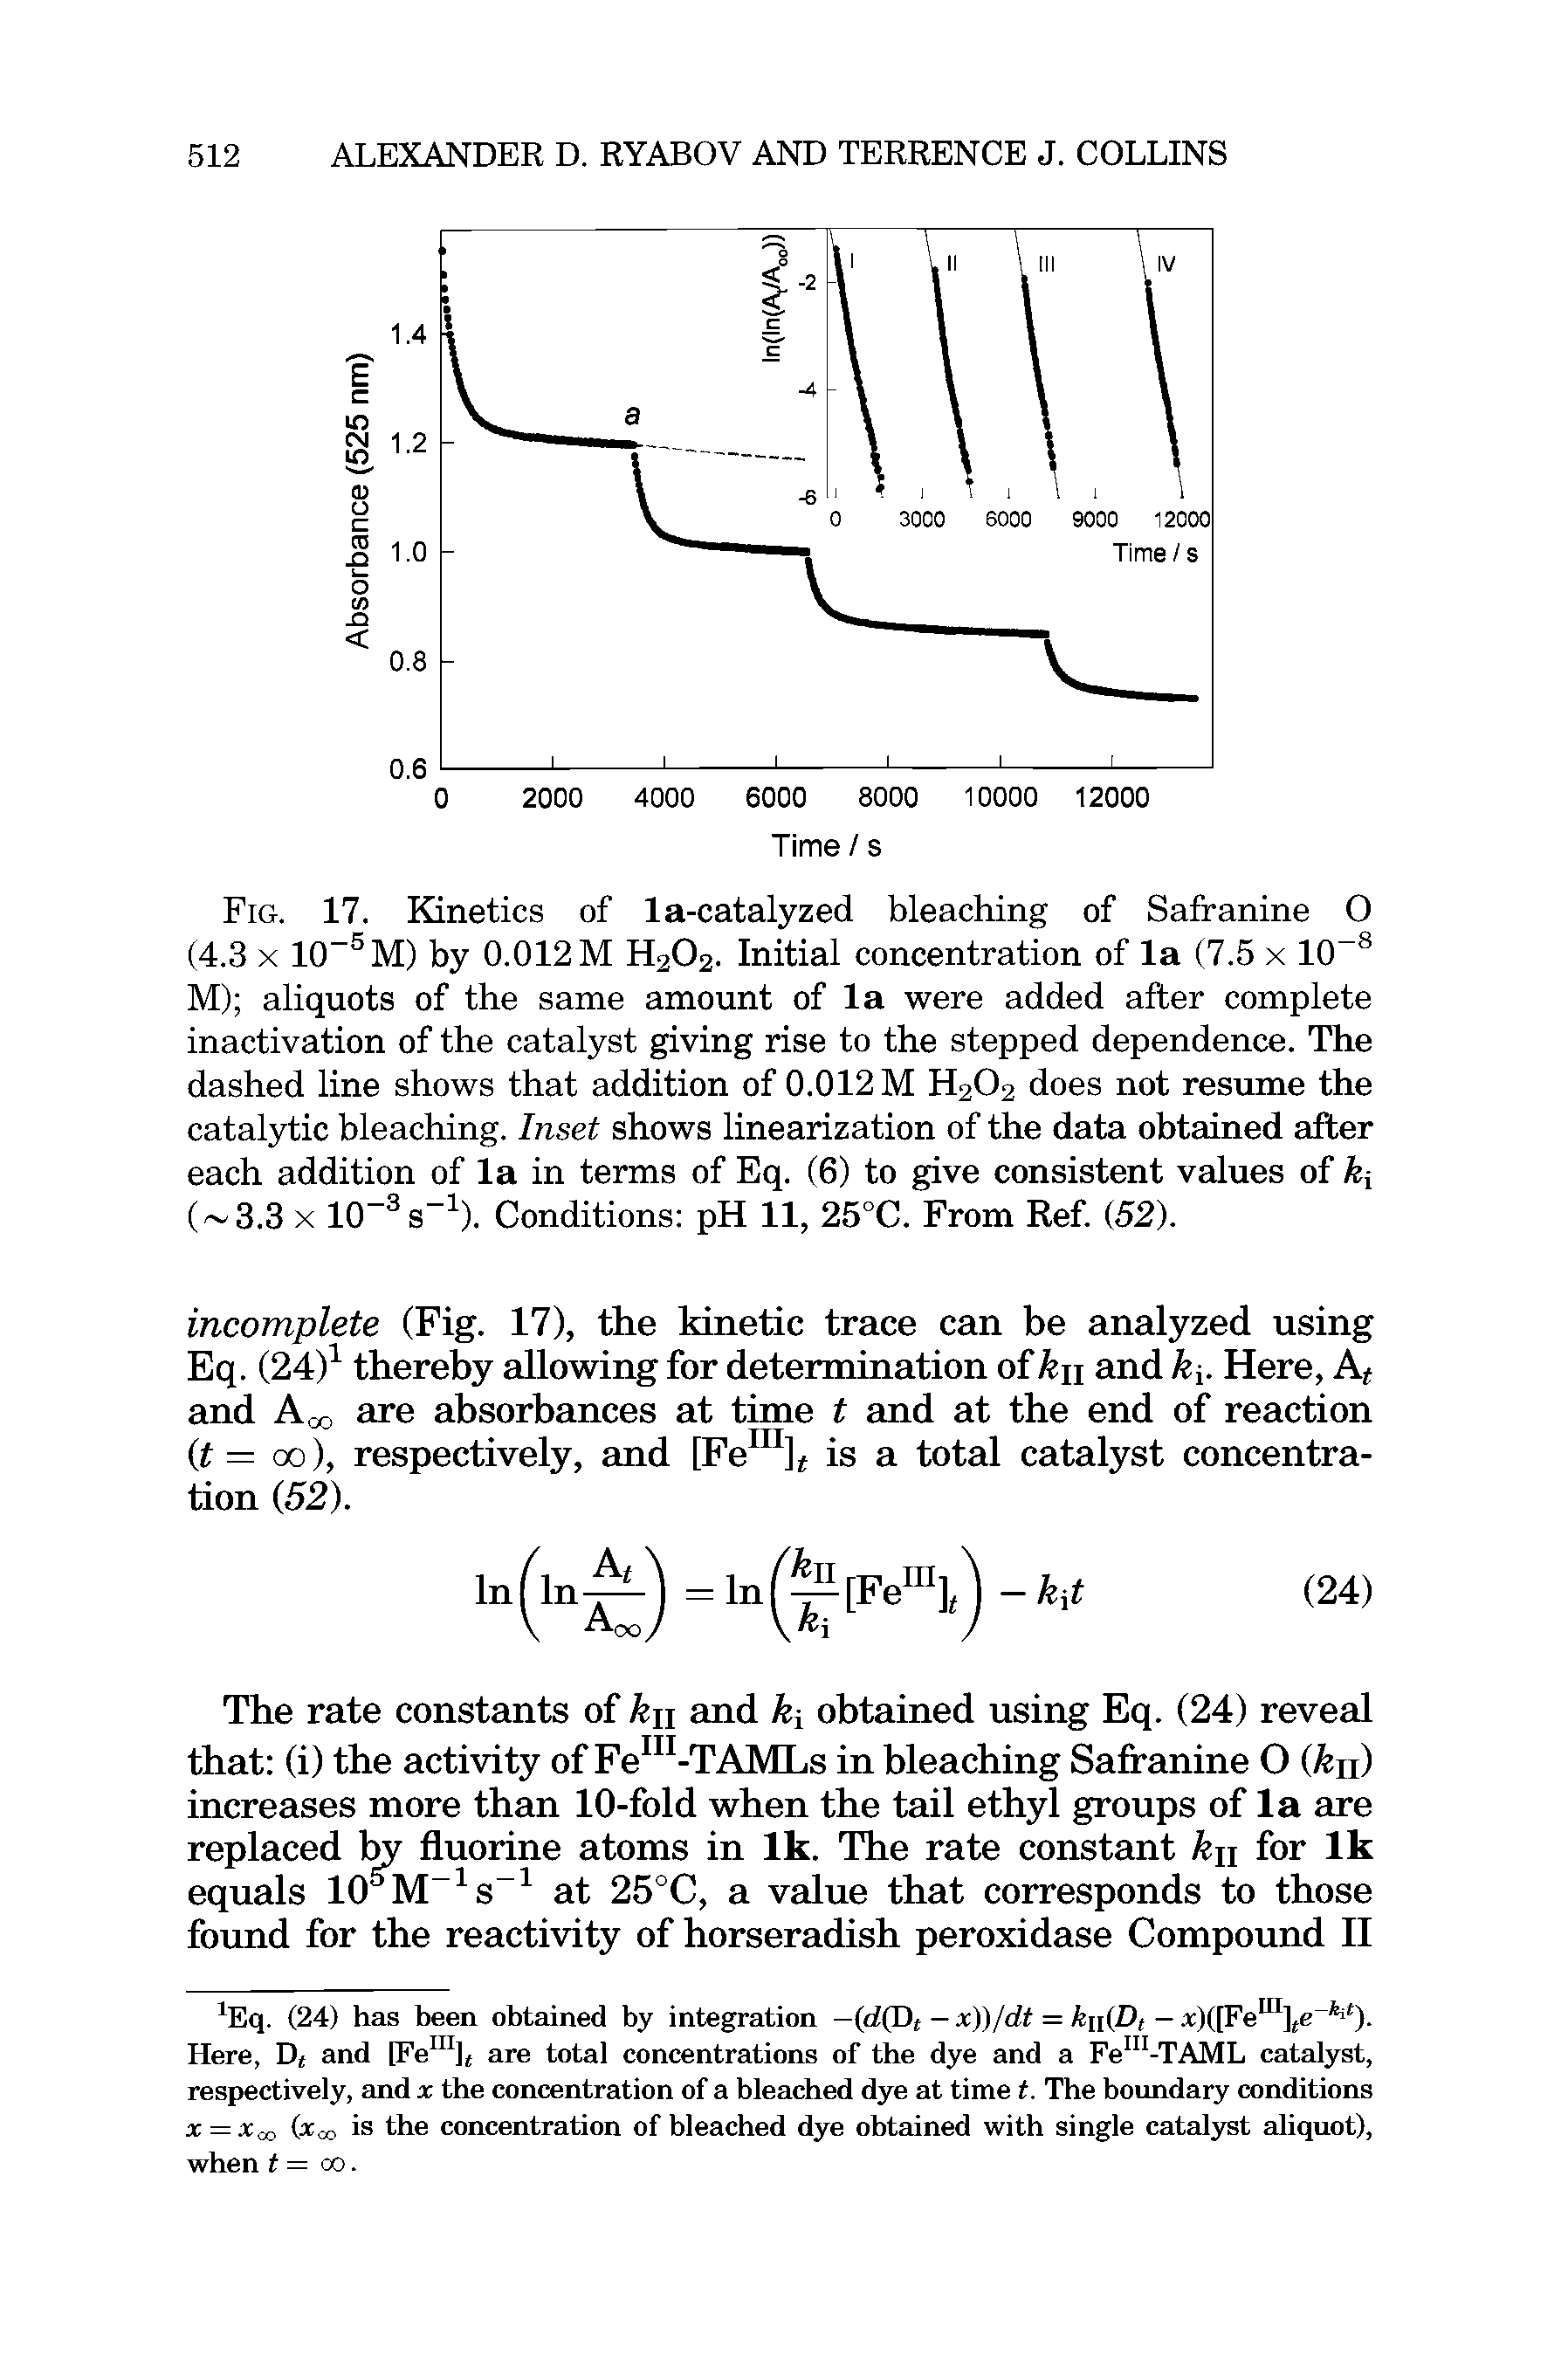 Fig. 17. Kinetics of la-catalyzed bleaching of Safranine 0 (4.3 x 10-5M) by 0.012 M H2O2. Initial concentration of la (7.5 x 10-8 M) aliquots of the same amount of la were added after complete inactivation of the catalyst giving rise to the stepped dependence. The dashed line shows that addition of 0.012 M H2O2 does not resume the catalytic bleaching. Inset shows linearization of the data obtained after each addition of la in terms of Eq. (6) to give consistent values of k ( 3.3 x 10 3s 1). Conditions pH 11, 25°C. From Ref. (52).